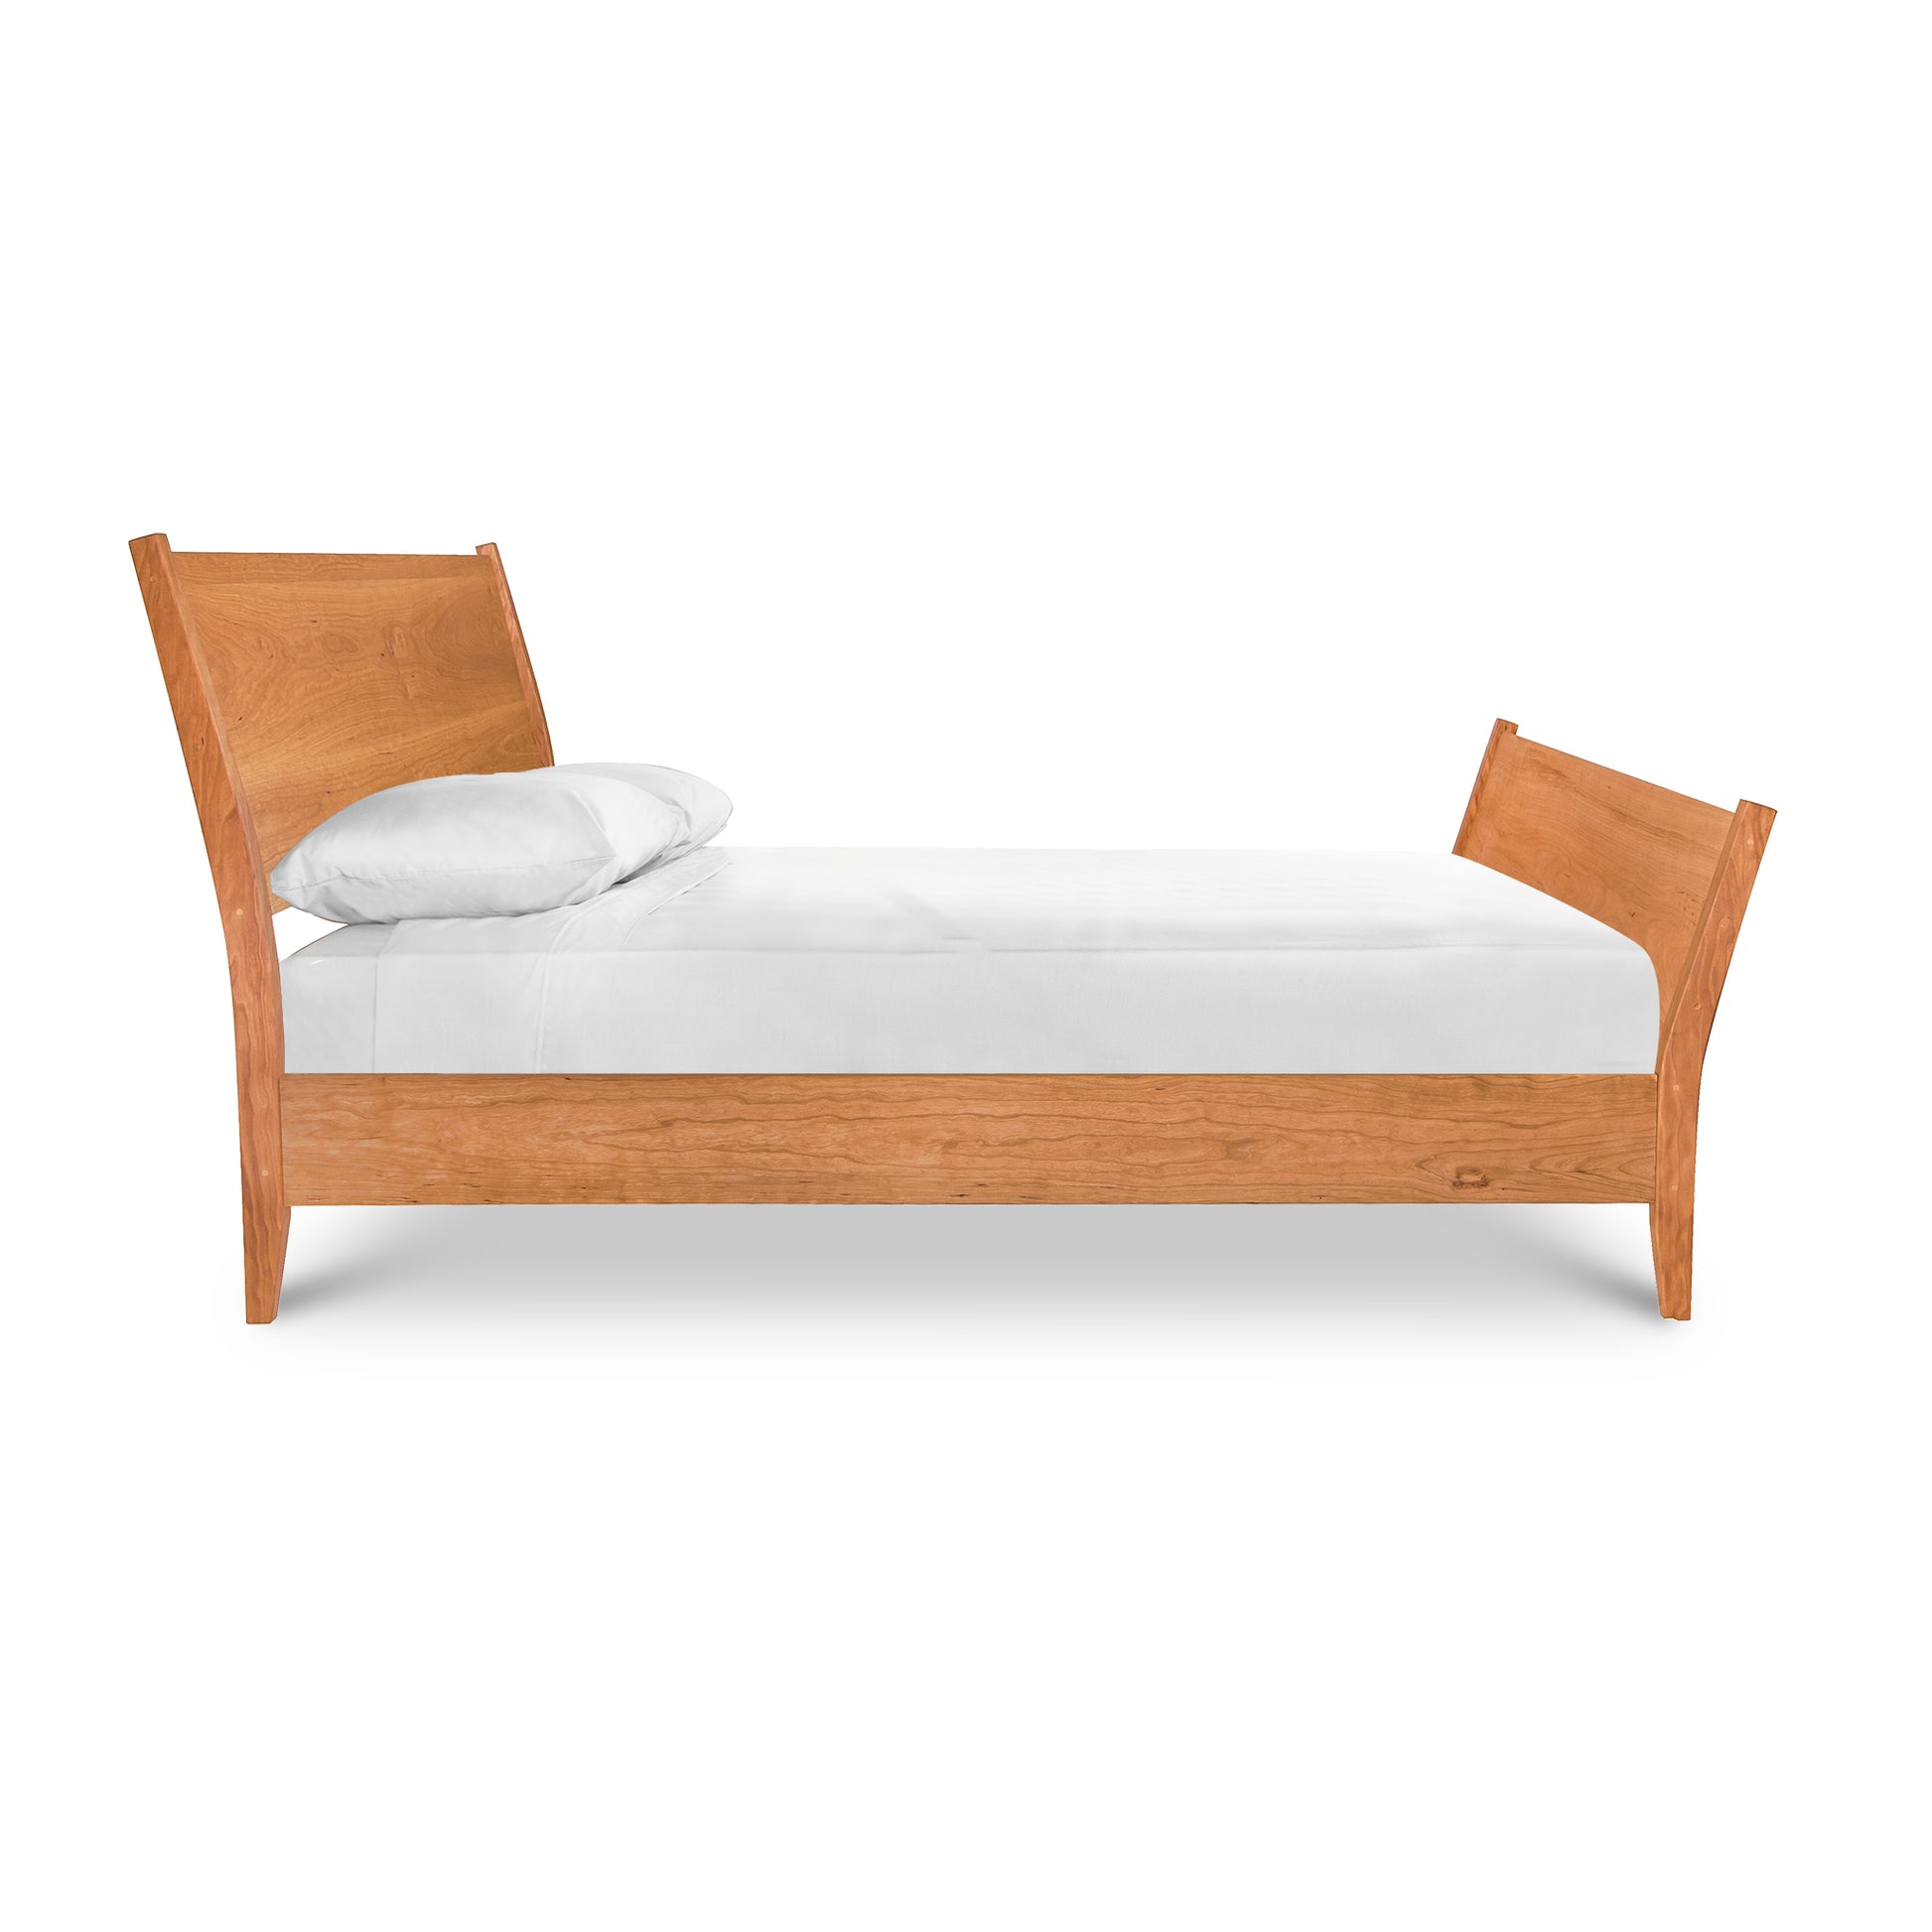 A Maple Corner Woodworks Andover Modern Incline Sleigh Bed design with a white mattress and a single pillow against a white background.